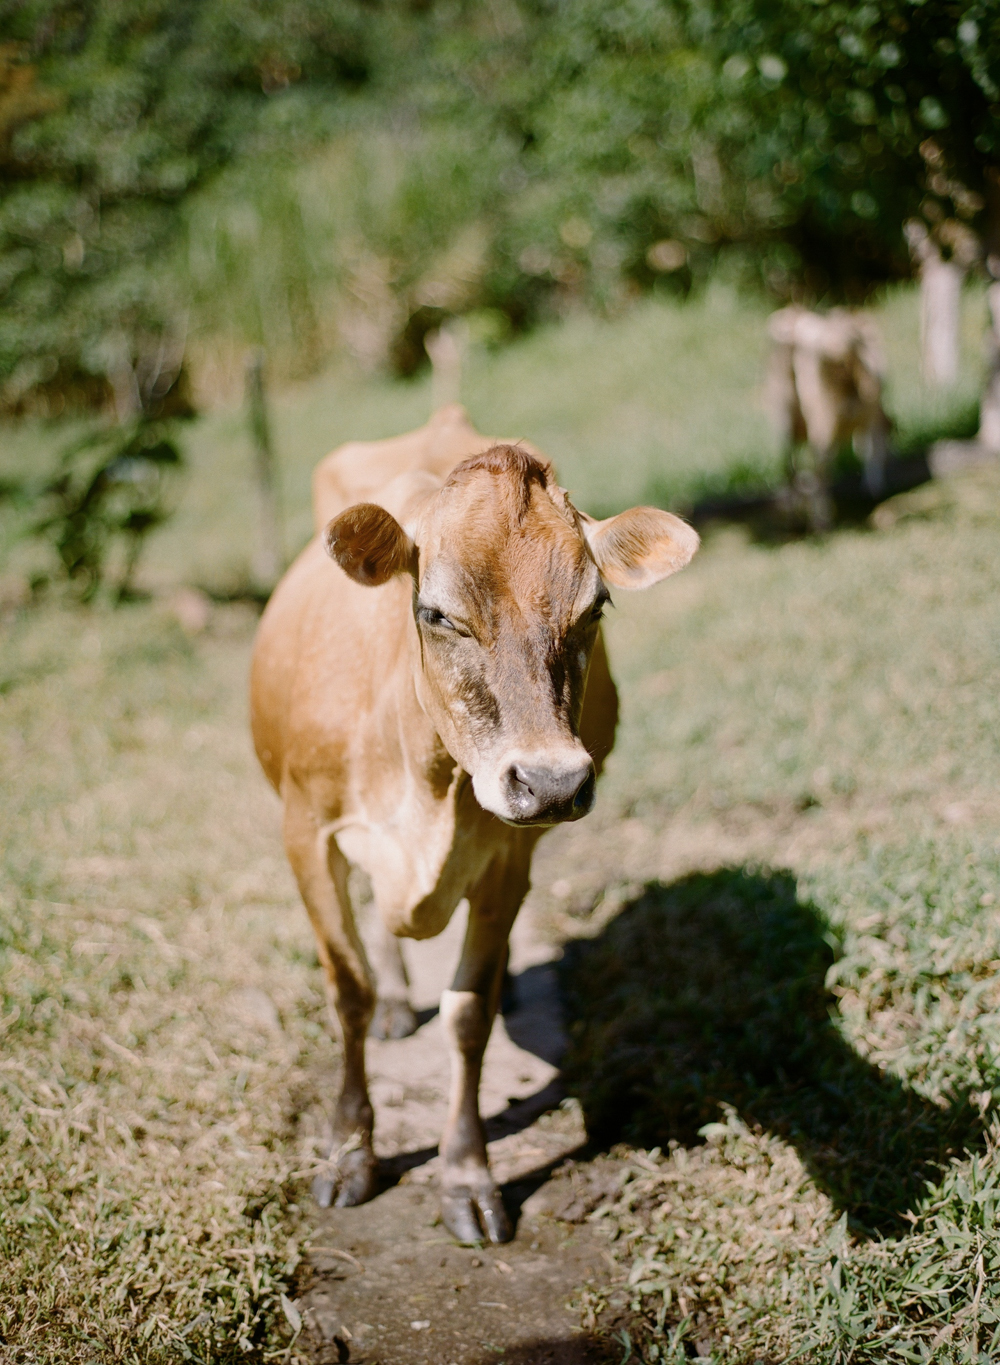 Cow on the Farm in Costa Rica